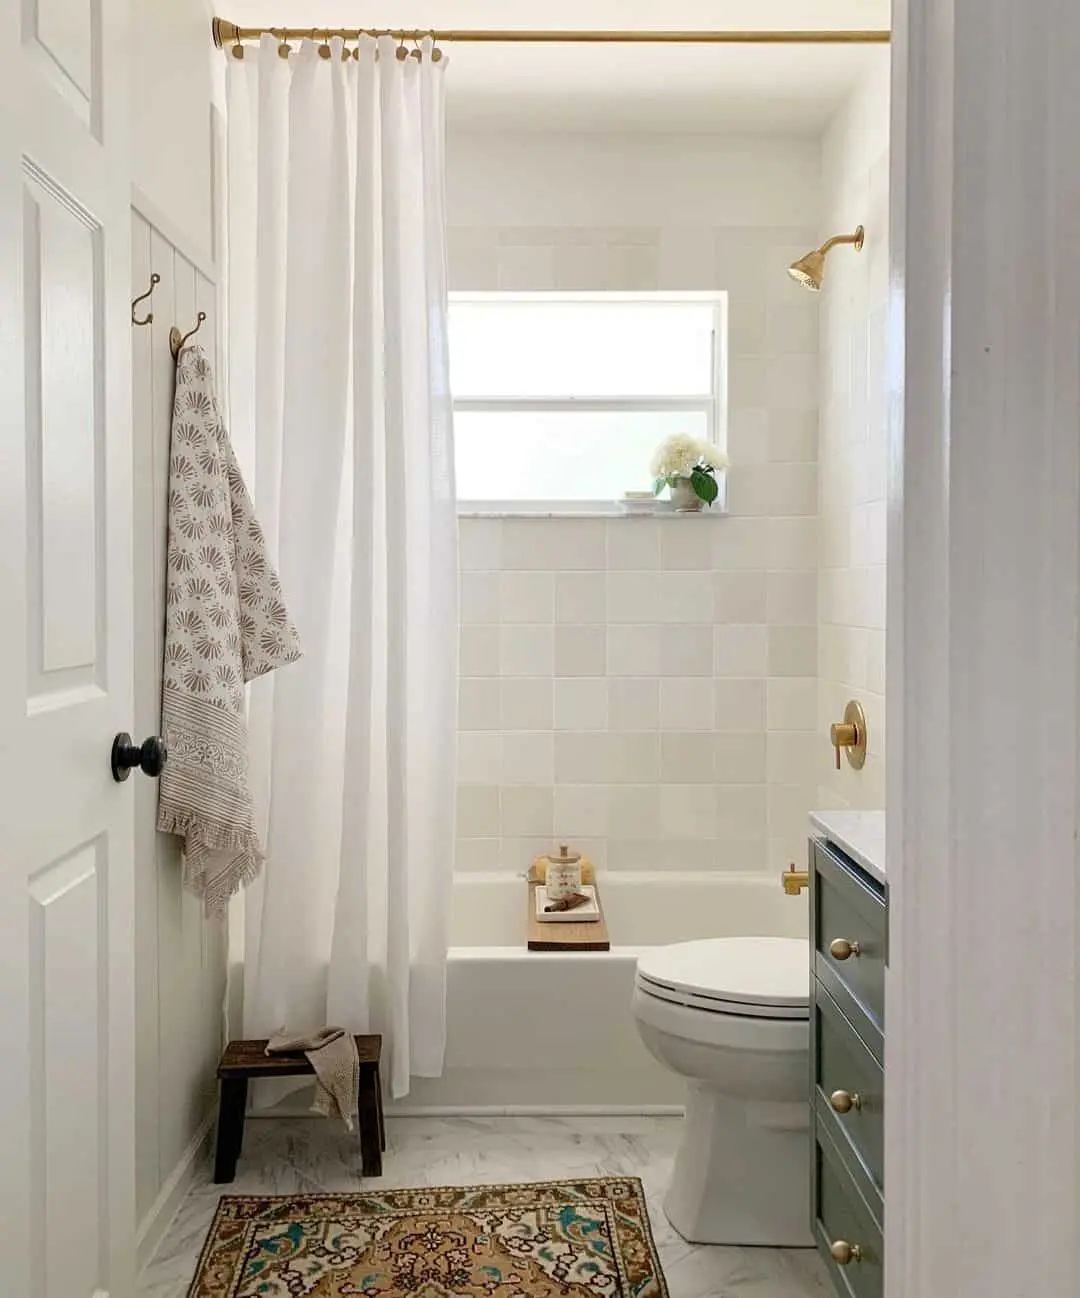 Discover 25 window in shower ideas to brighten your bathroom and transform it into a stunning sanctuary. Get inspired, unleash your creativity, and start your bathroom makeover here!